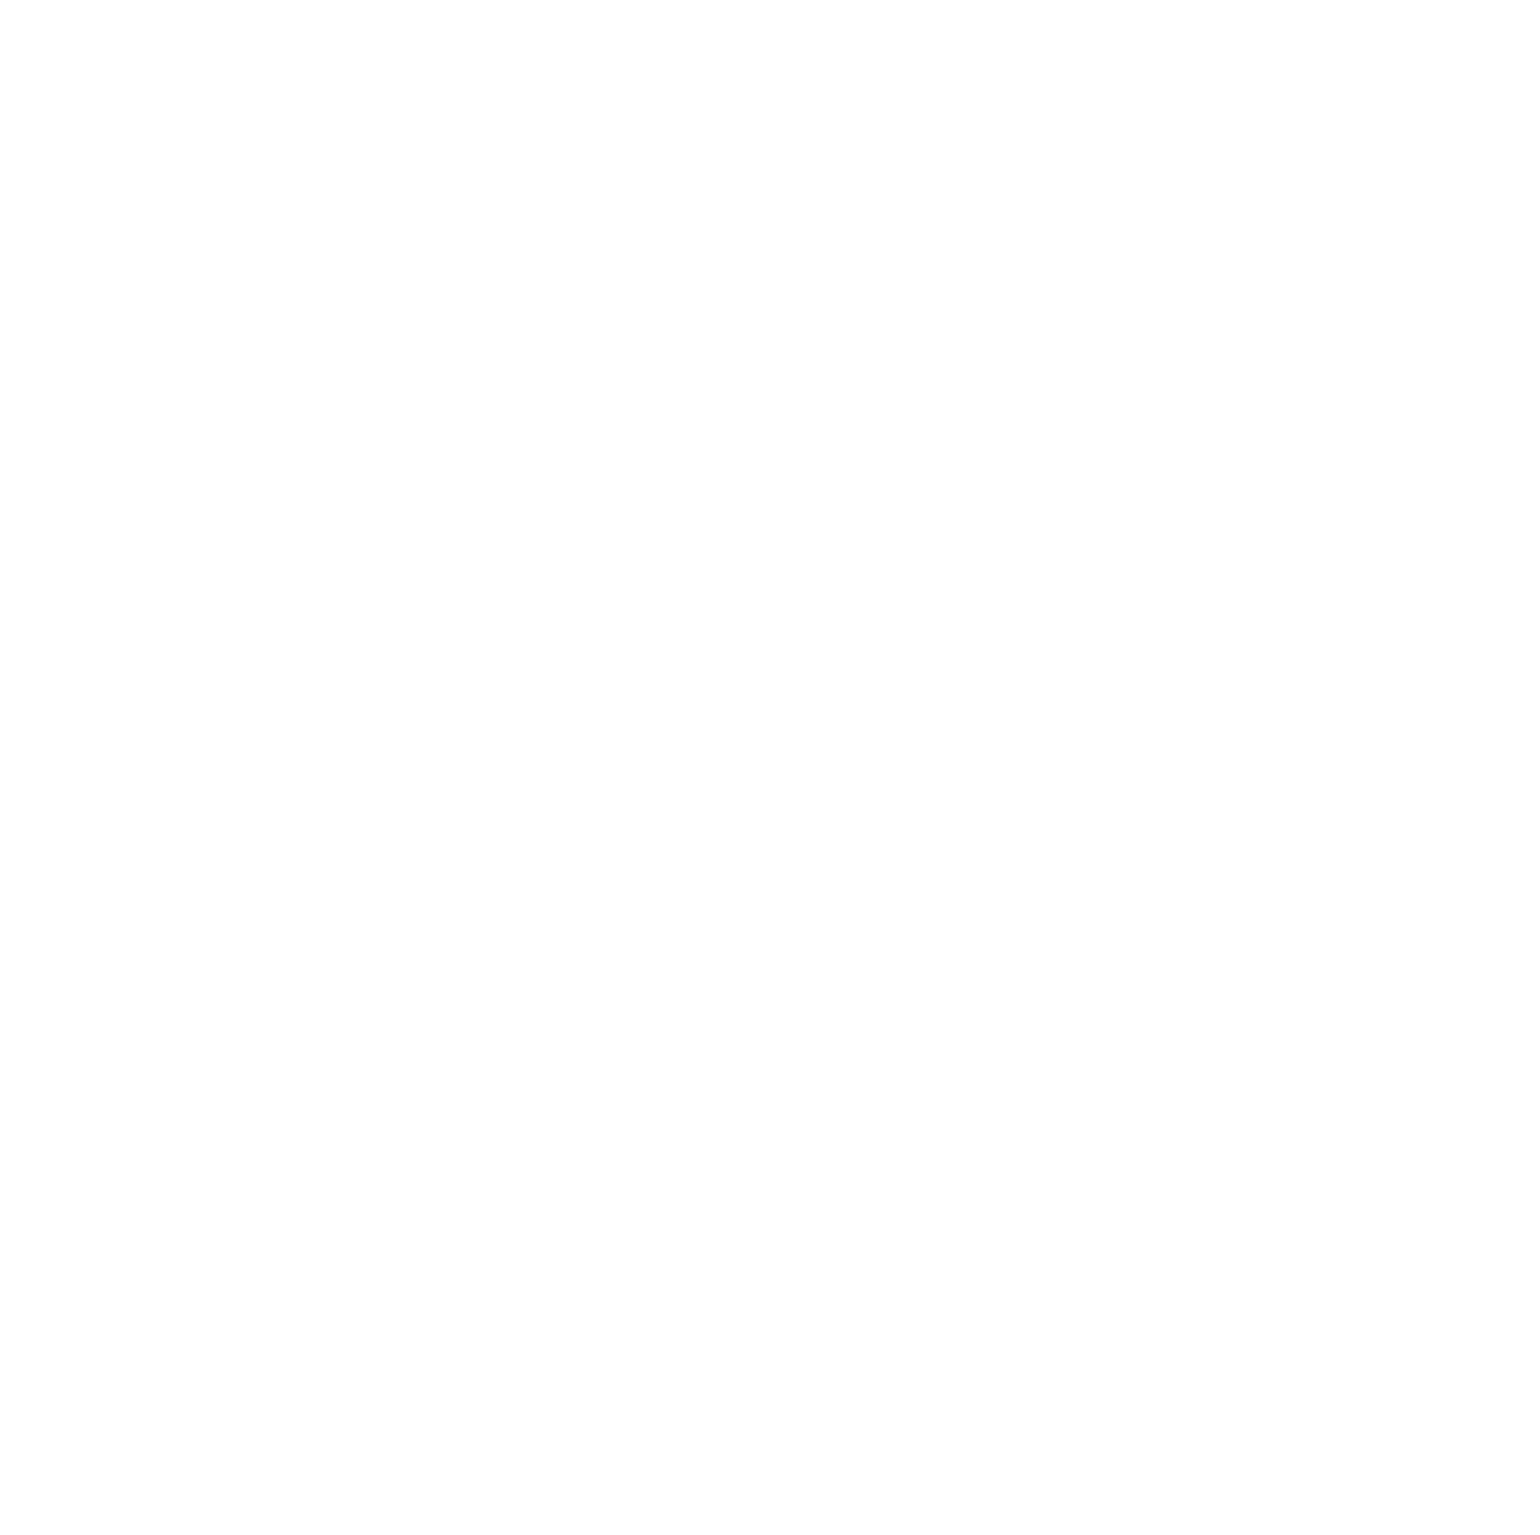 Lead Counsel Verified badge